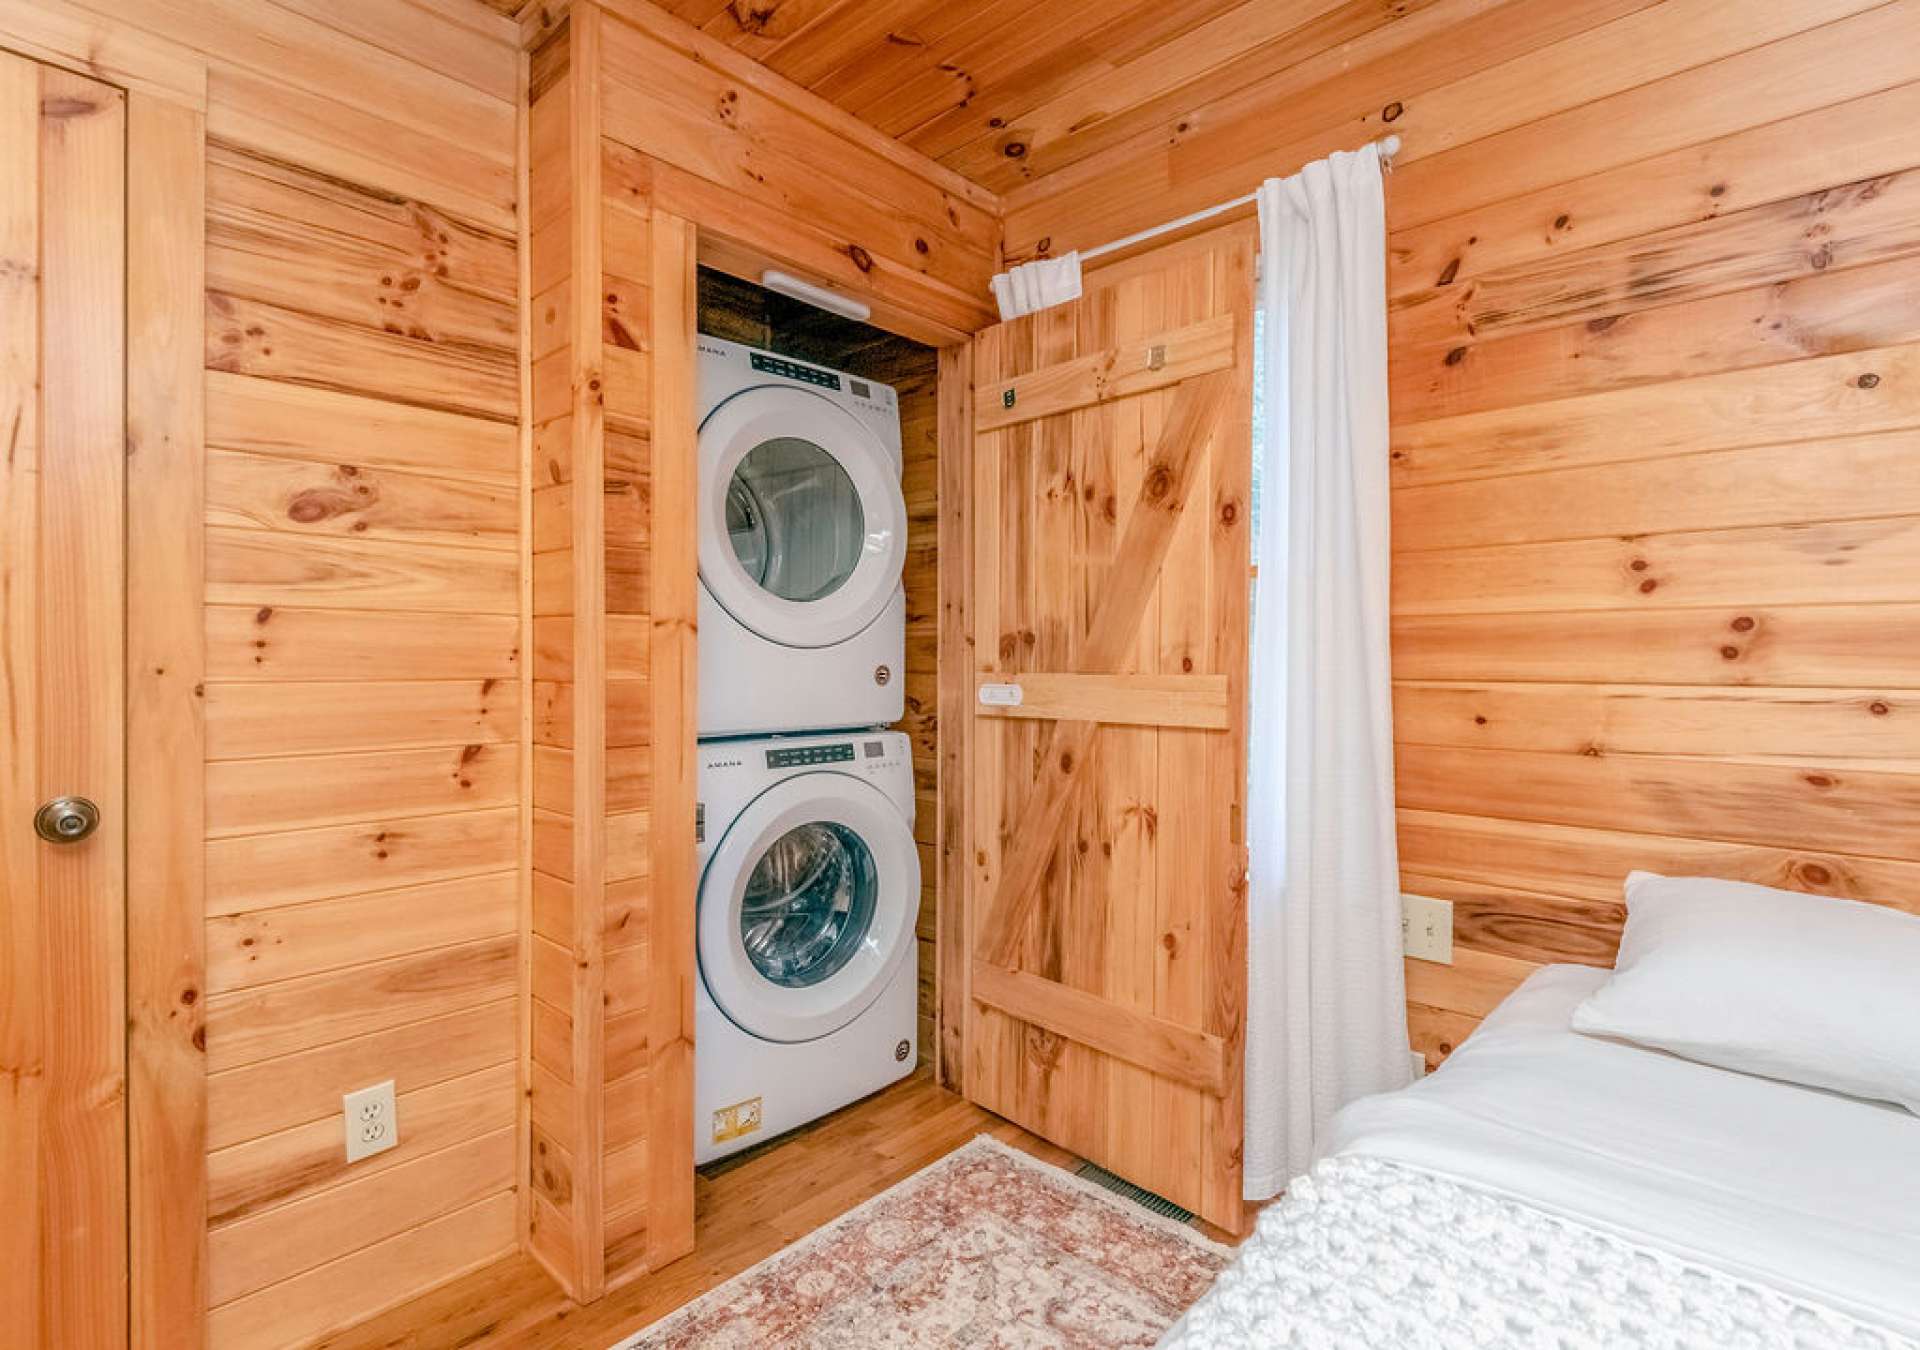 The laundry closet is conveniently located on the main level.